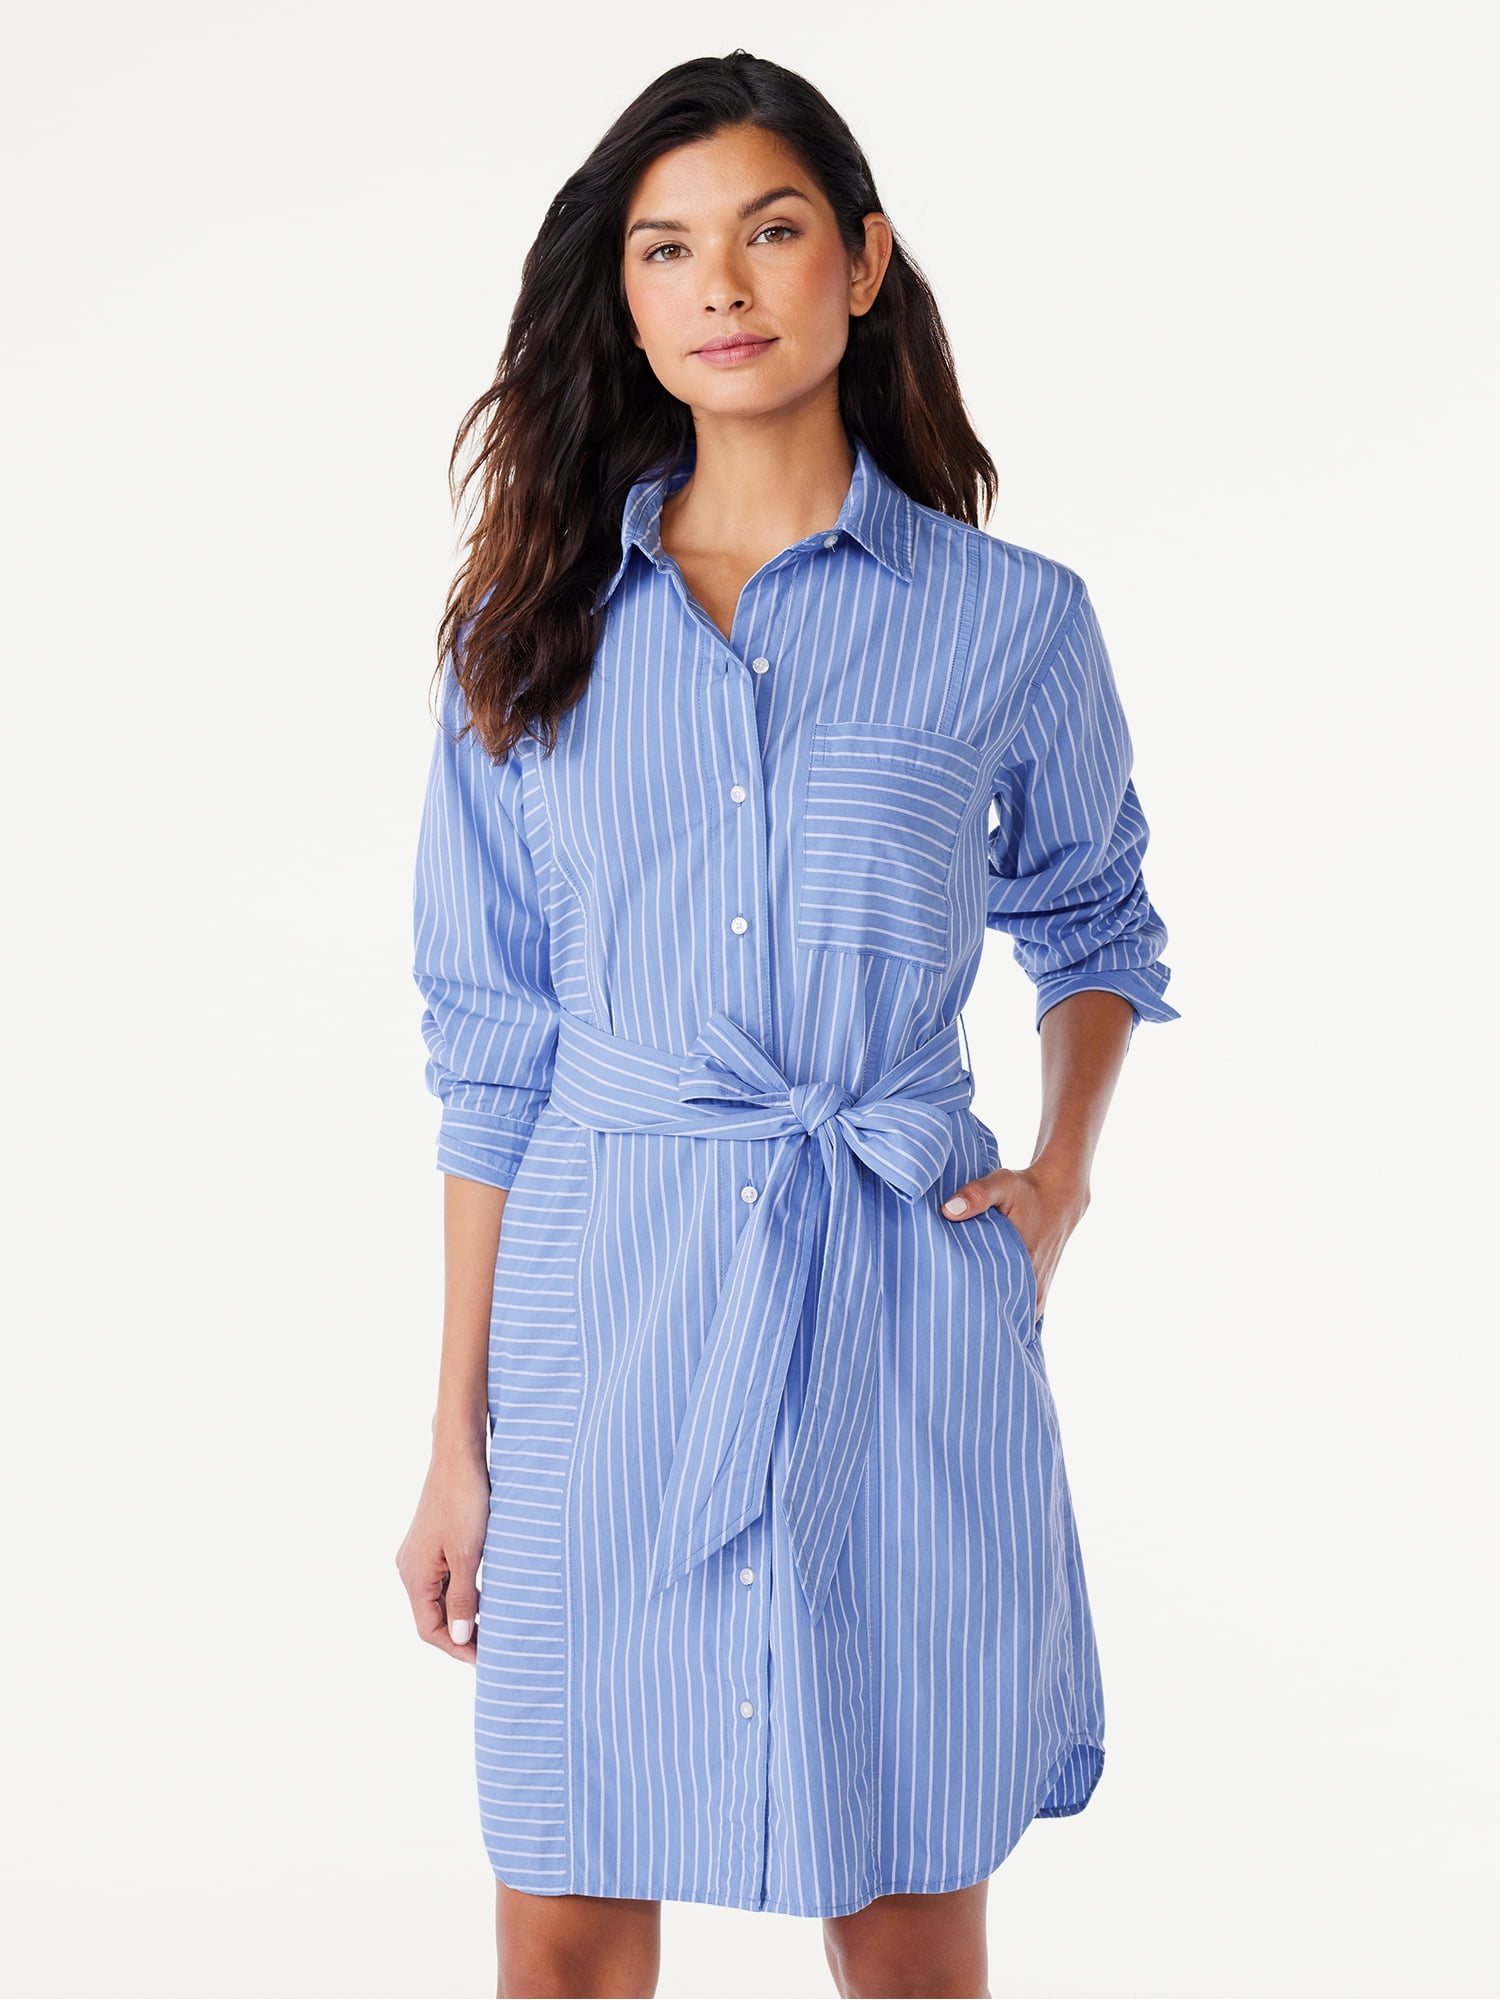 Free Assembly Women's Belted Mini Shirtdress with Long Sleeves, Sizes ...